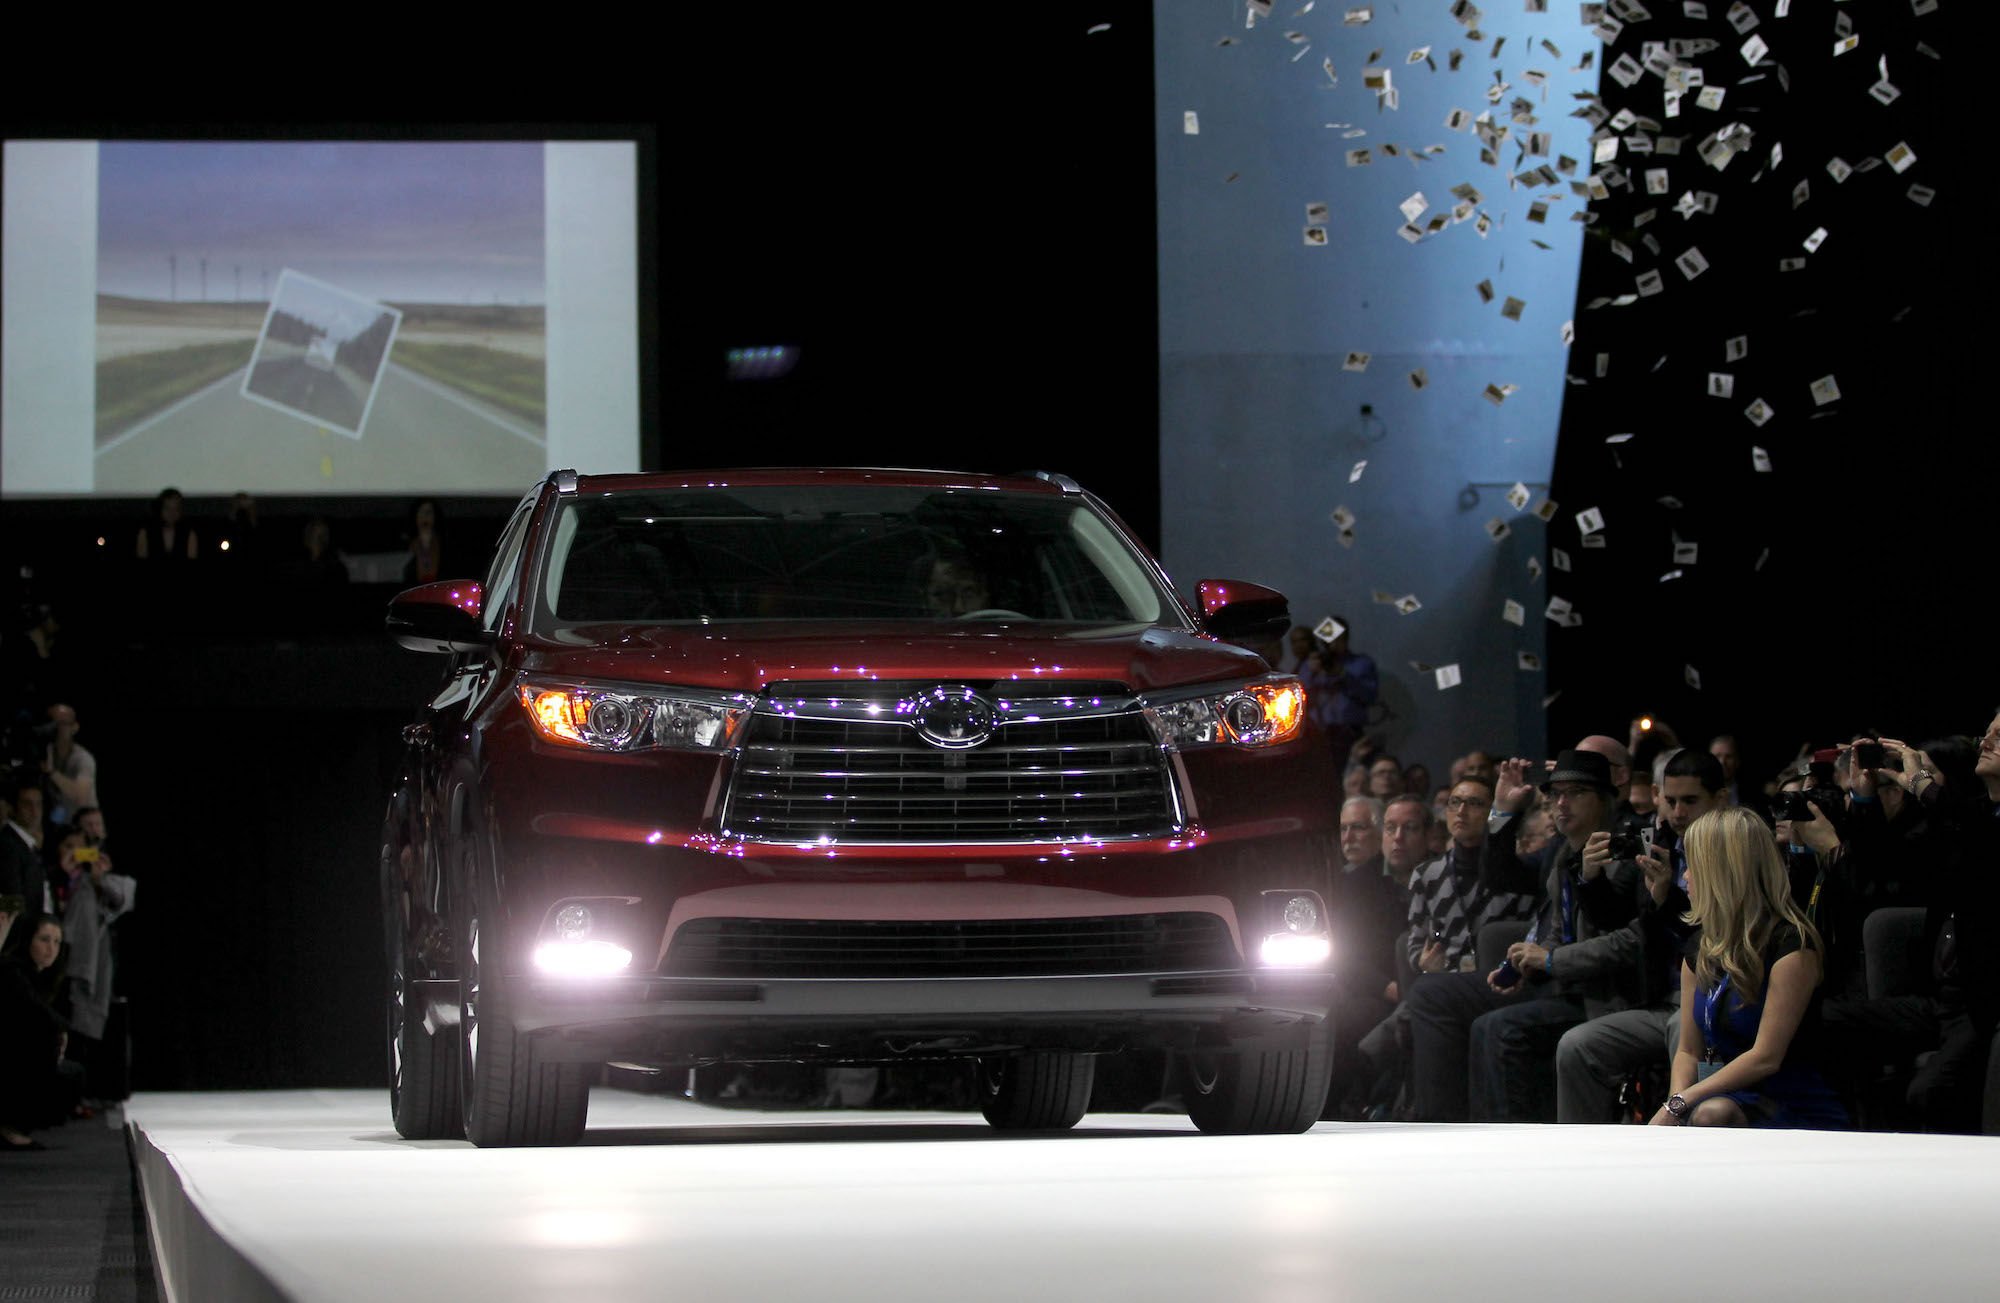 A burgundy 2014 Toyota Highlander midsize crossover SUV is unveiled during the 2013 New York International Auto Show on Wednesday, March 27, 2013